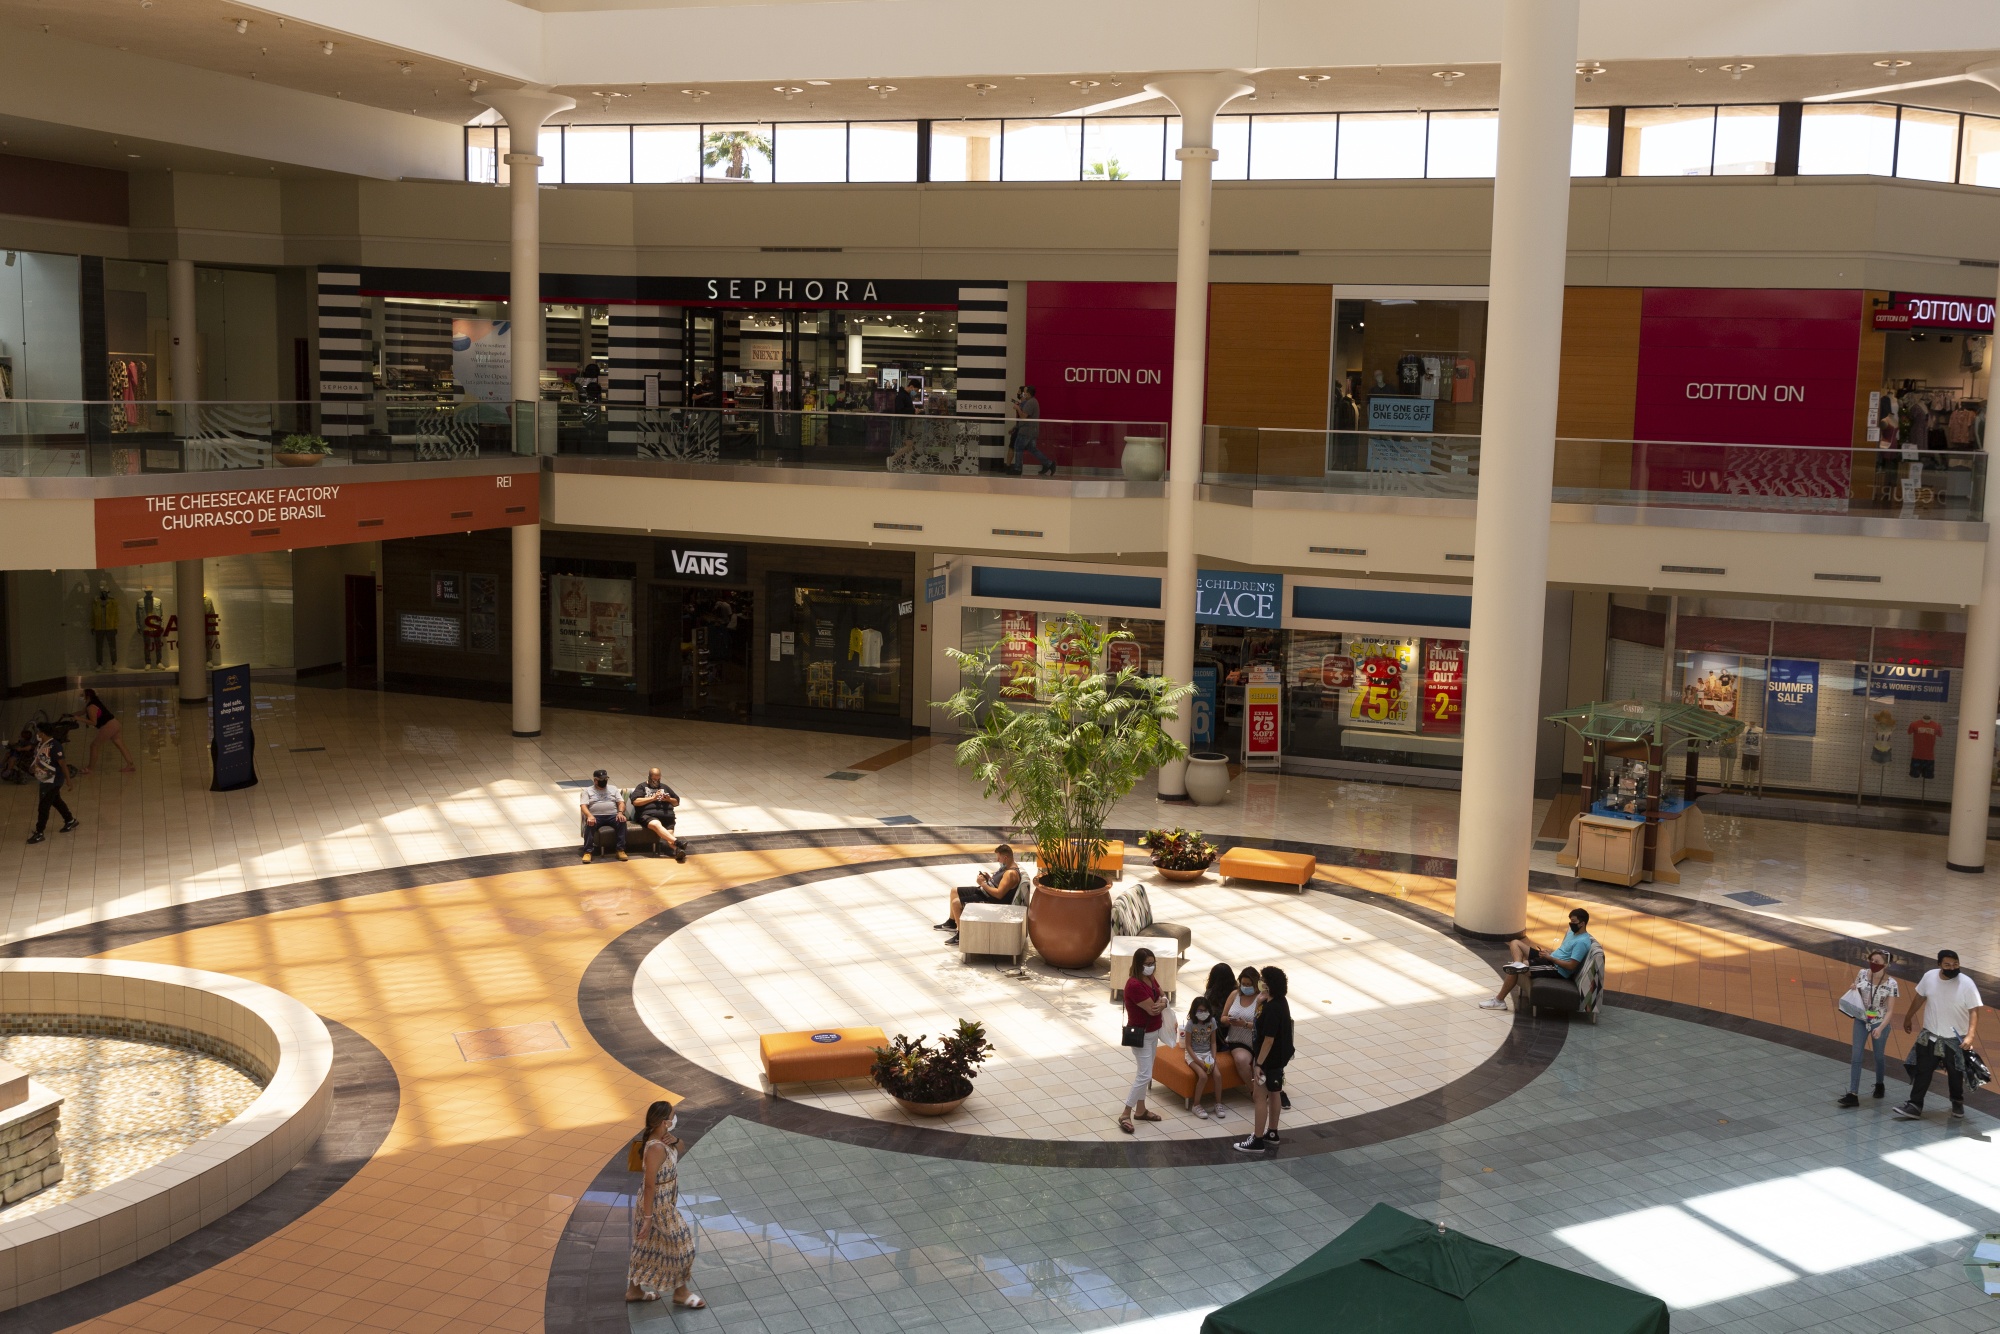 Many malls, like this one in Tucson, Arizona, have reopened, but shoppers&nbsp;still aren’t showing up. Americans&nbsp;are hesitant to go back to stores, according to a recent survey, in what could be a long-term shift in behavior.